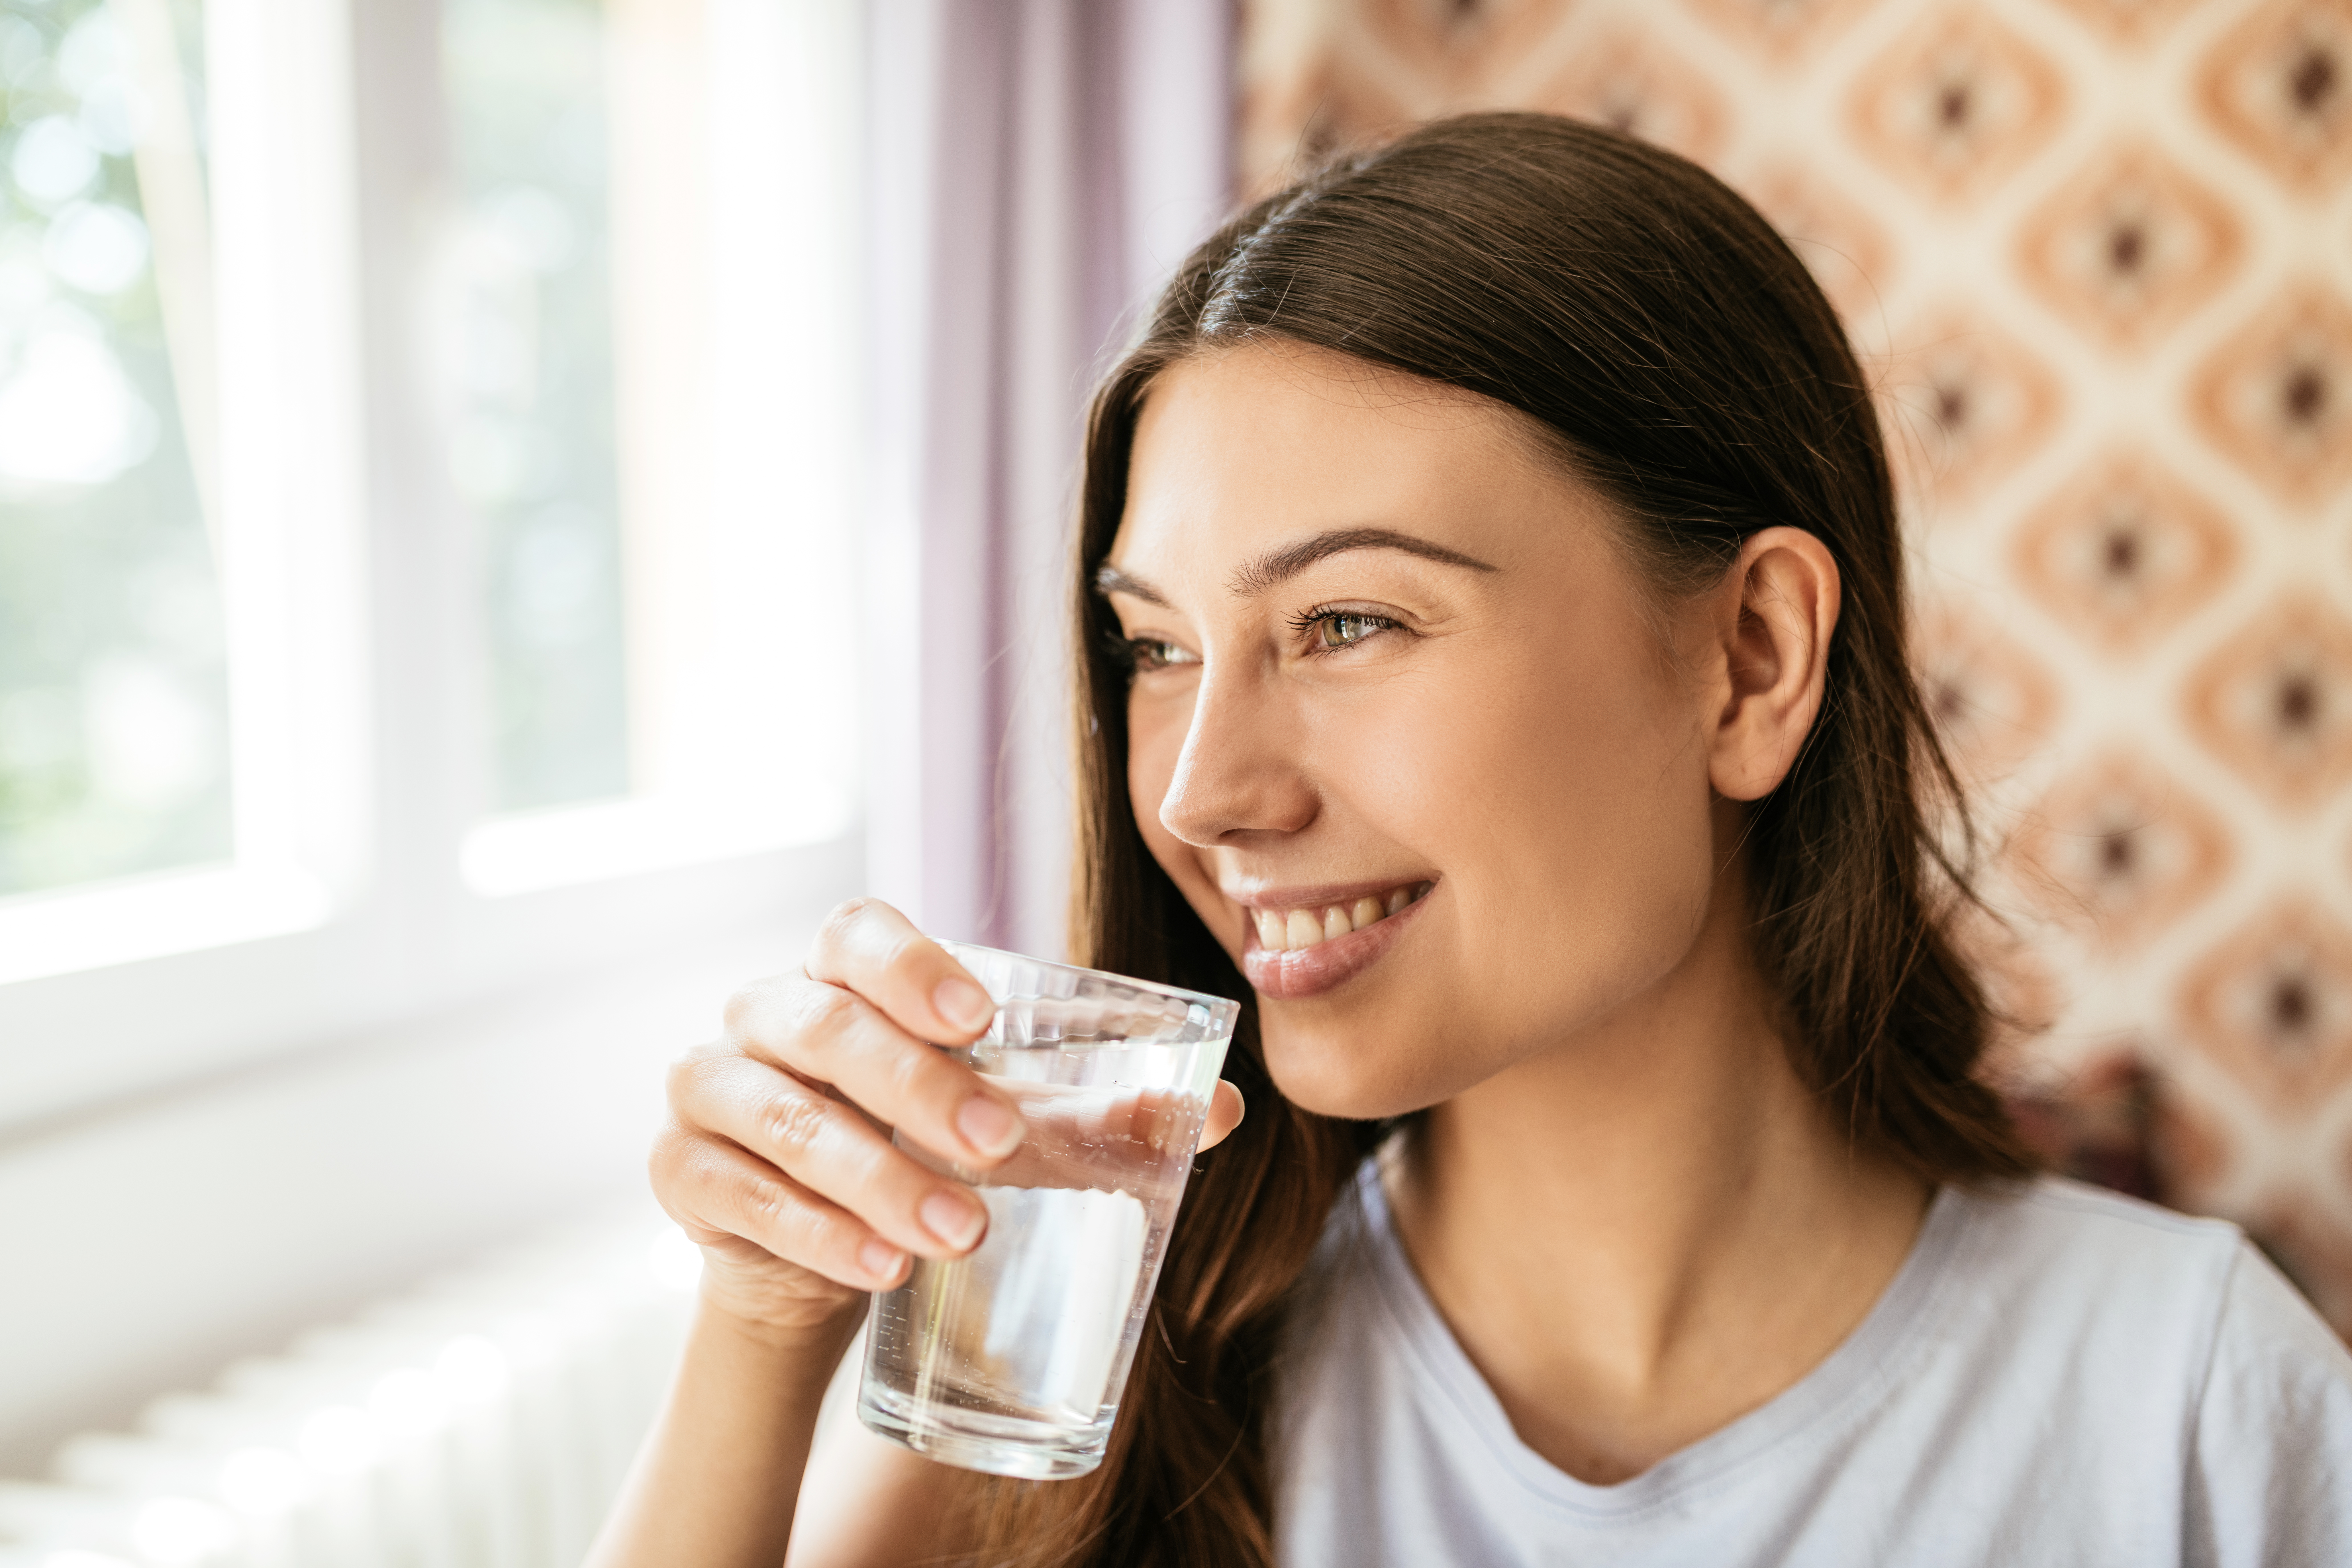 Healthy young woman drink water after taking a birth control pill while looking out the window and smiling.